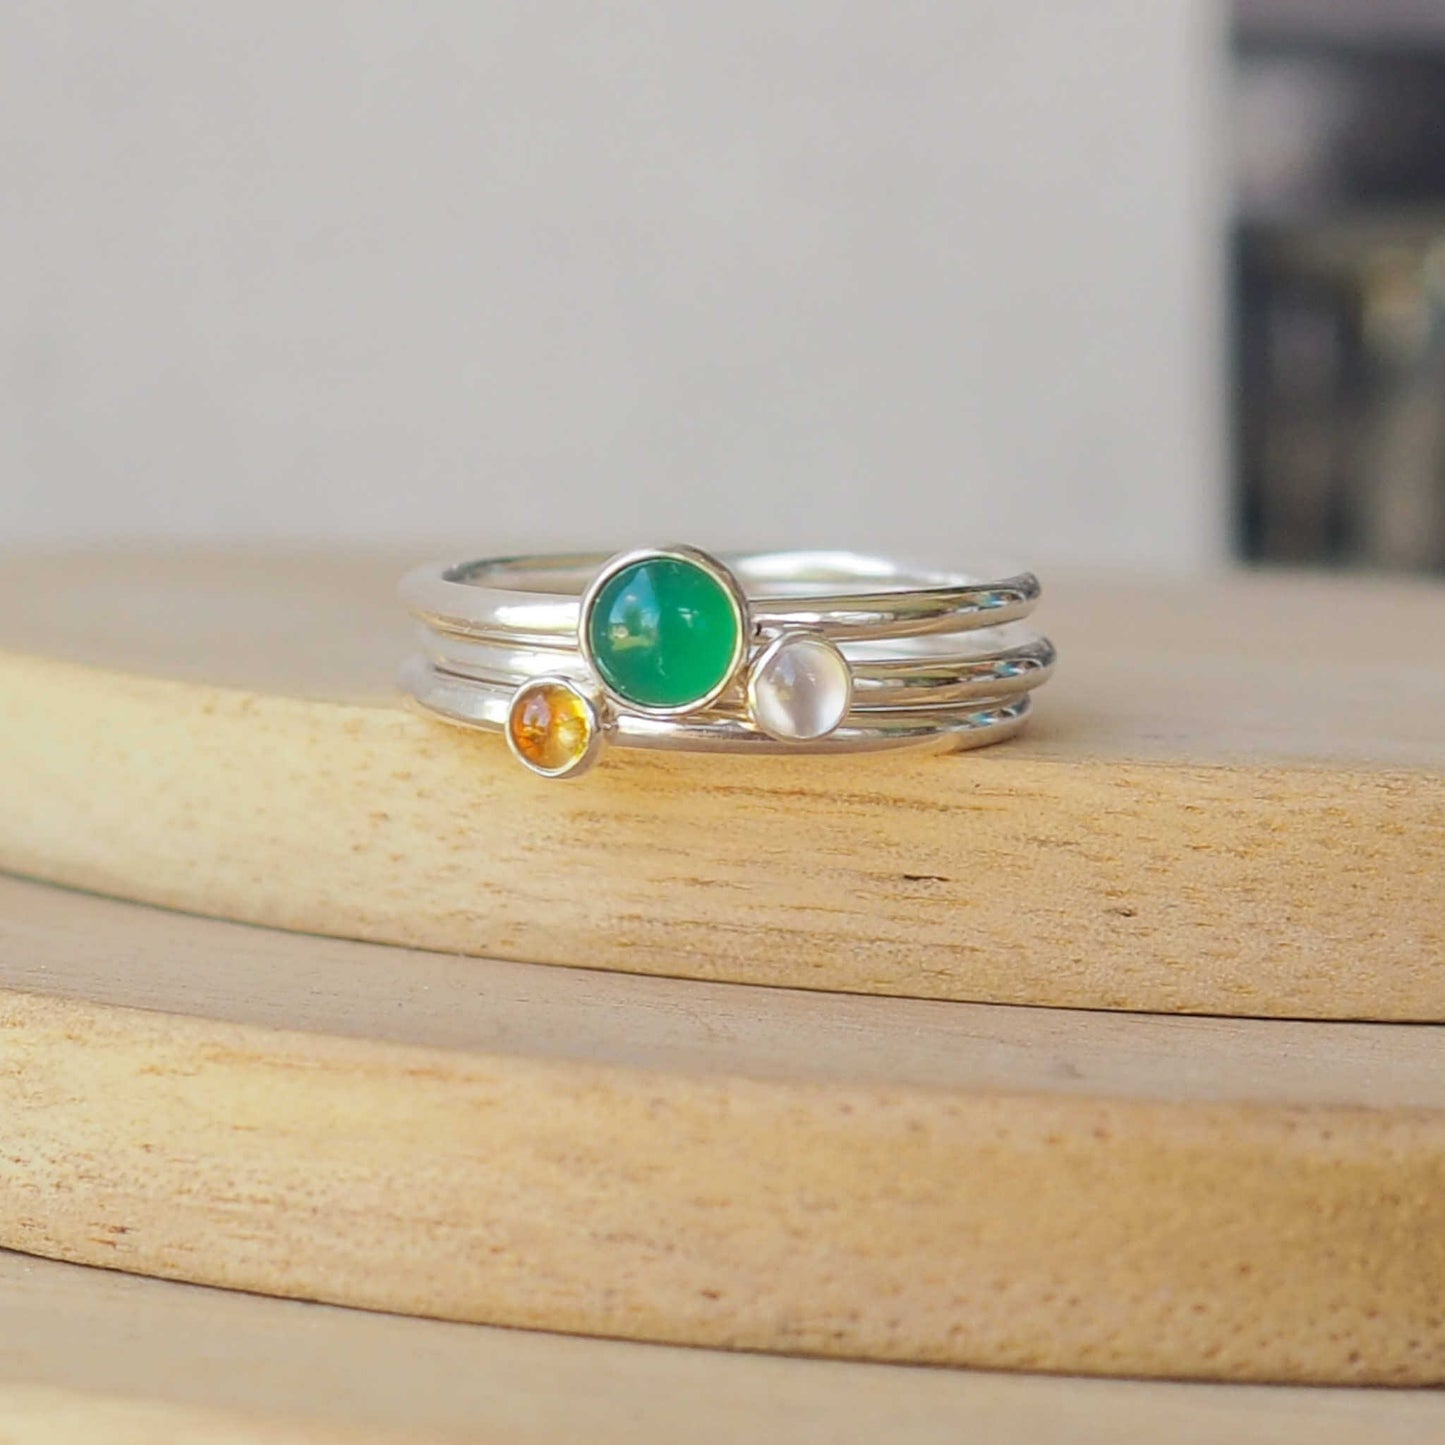 Three Birthstone Ring set made from Sterling Silver, with a 5mm round Green Agate Birthstone for May, and two smaller 3mm gemstones in Citrine for November, and Moonstone for June. The gemstones colours are emerald green, warm yellow and milky white. Handmade in Scotland by Maram Jewellery